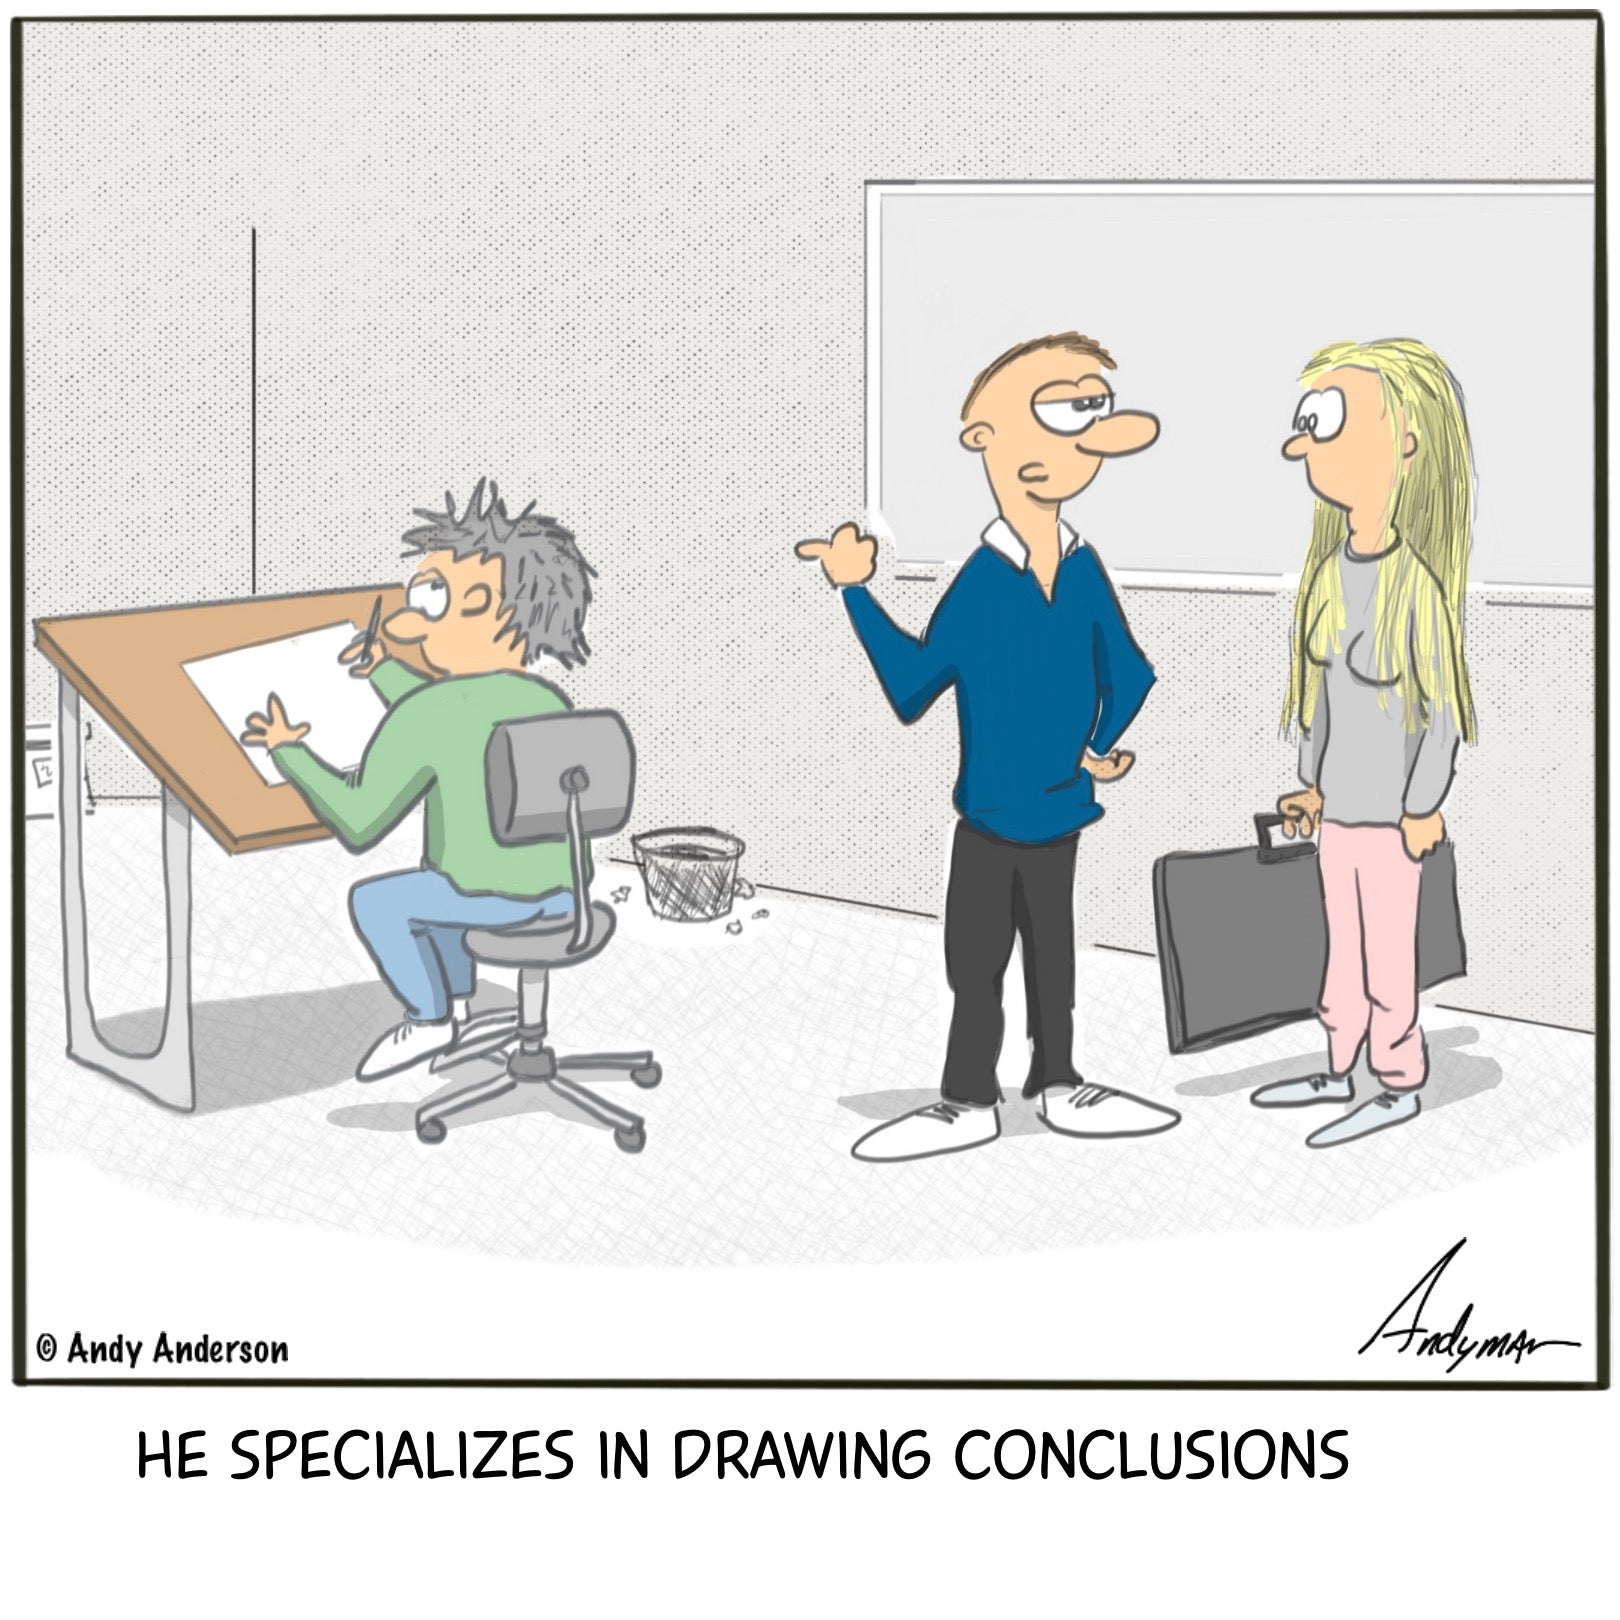 Cartoon about an artist at a drawing board, drawing conclusions